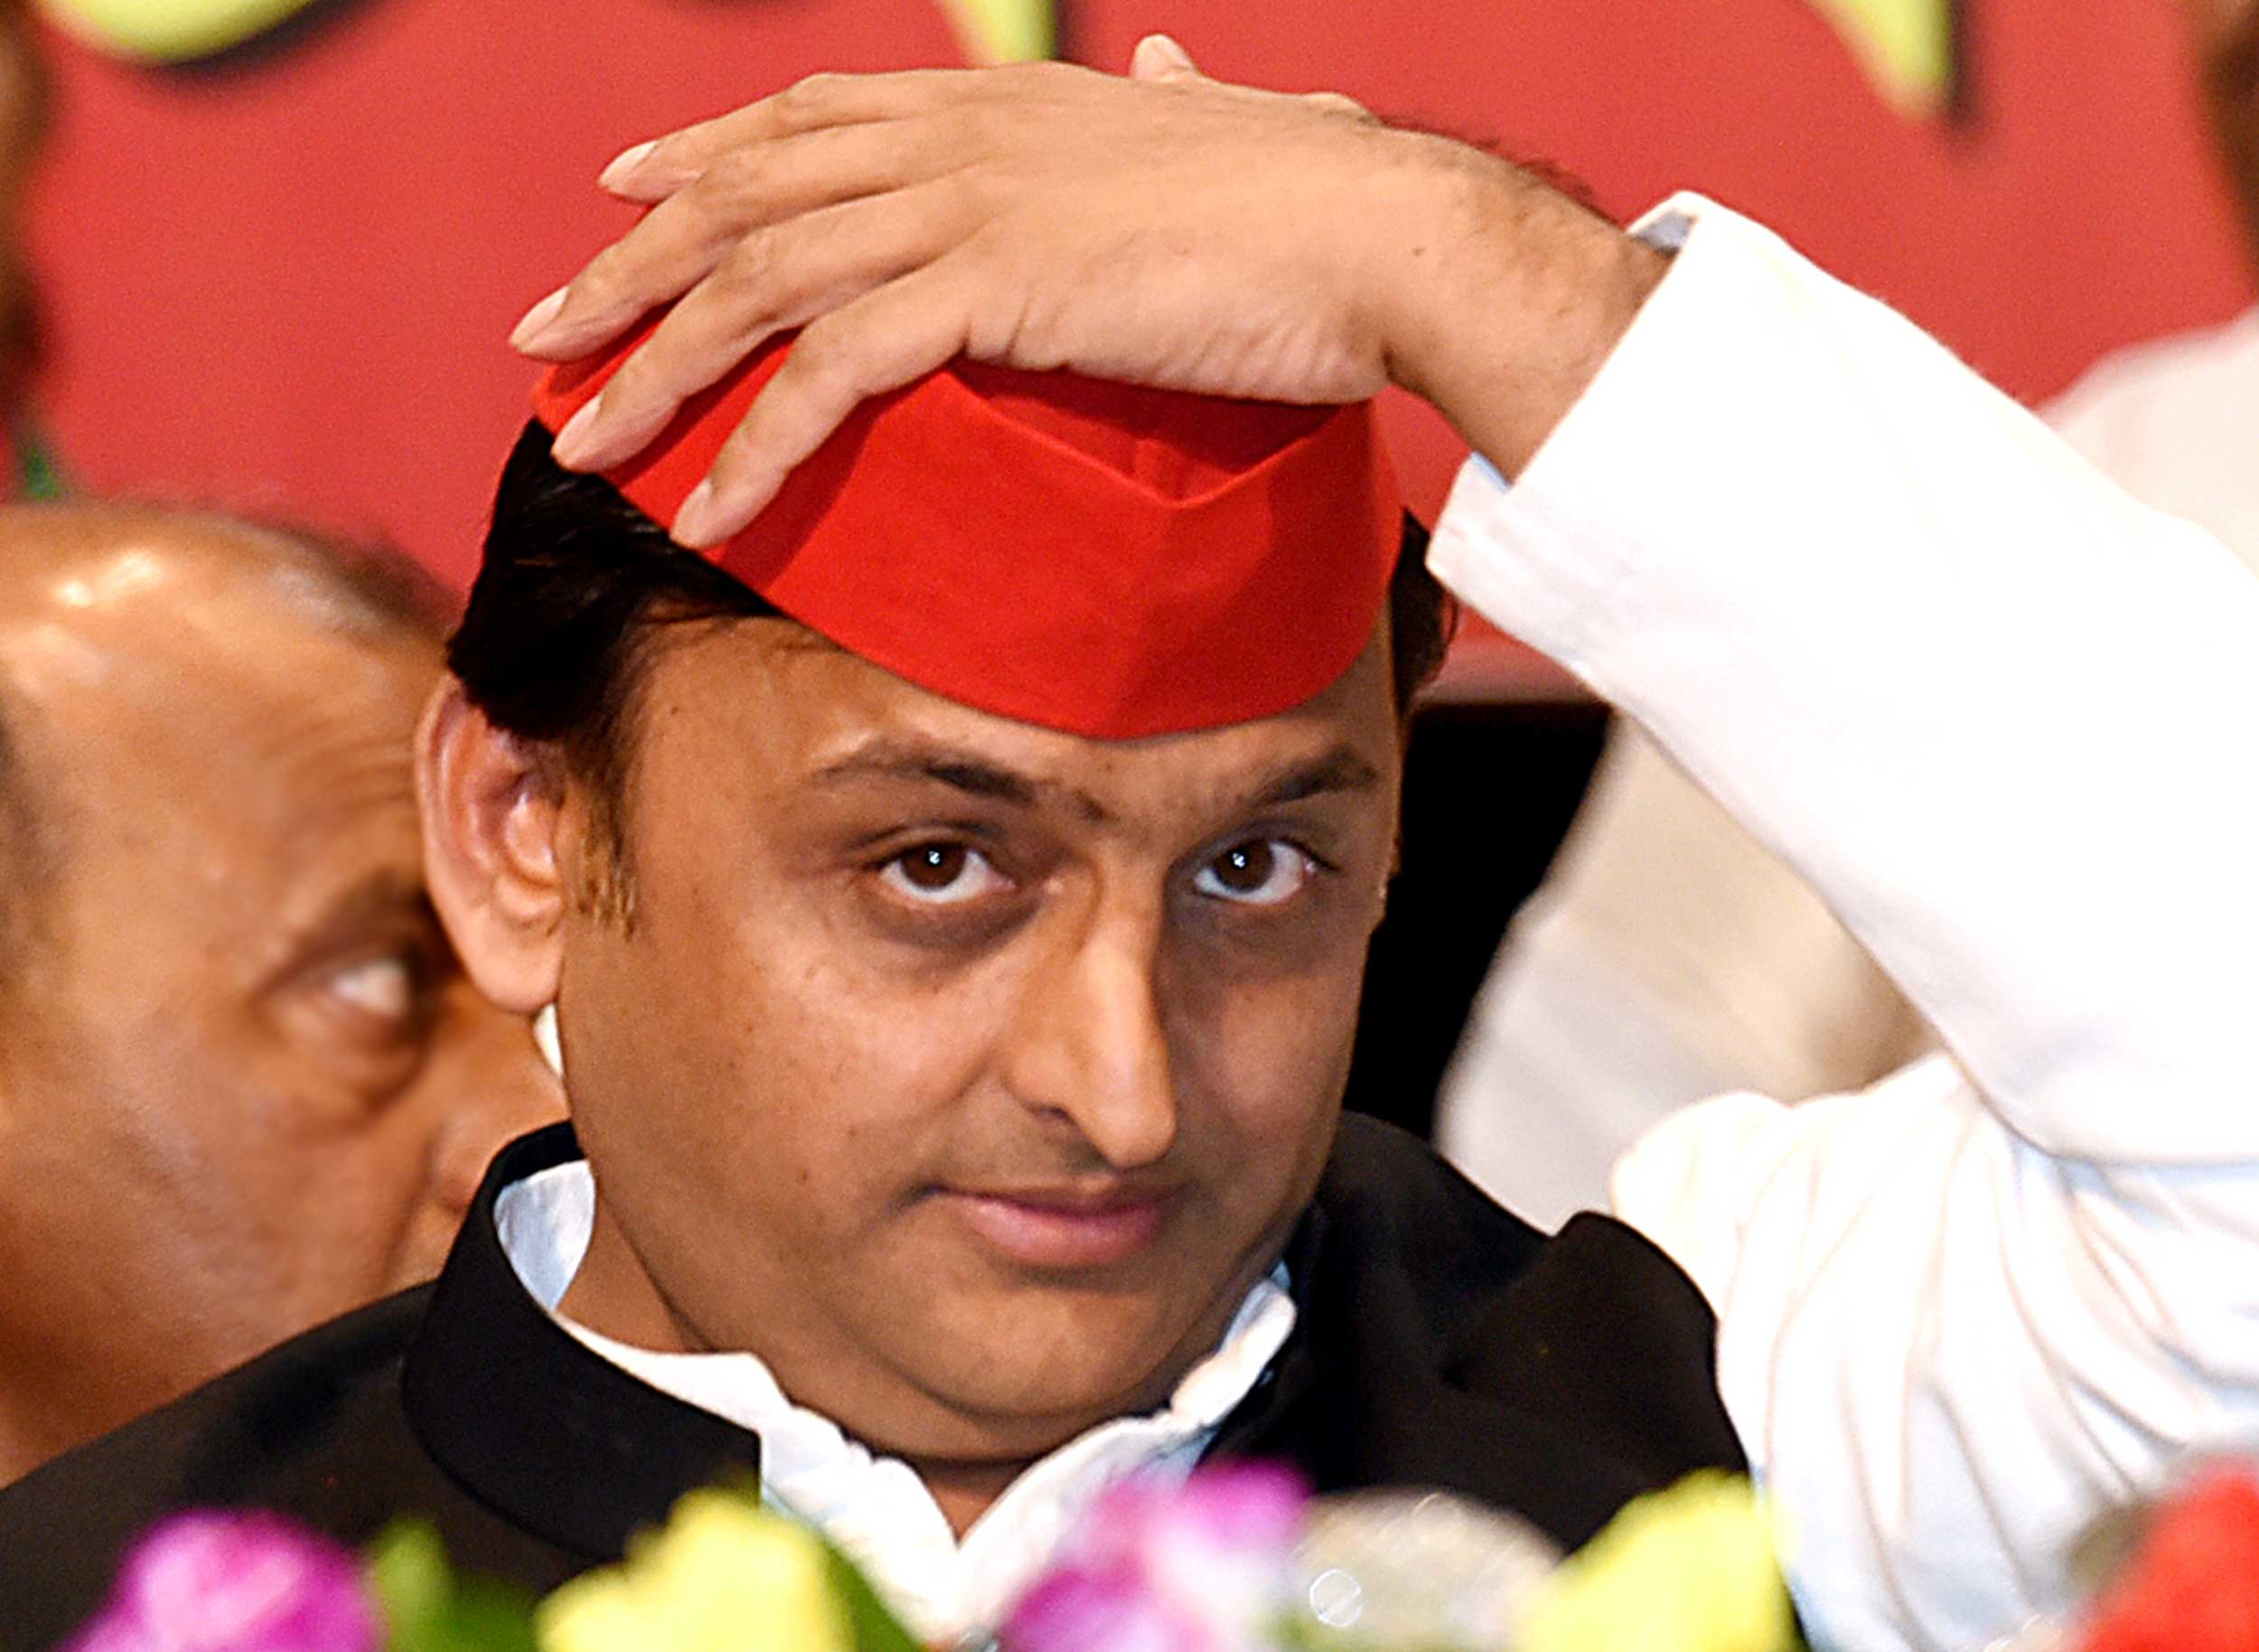 Samajwadi Party president Akhilesh Yadav, negotiating an alliance with traditional rival Bahujan Samaj Party that could hurt the BJP, held the mining ministry from 2012 to 2014, the first two years of his chief ministership